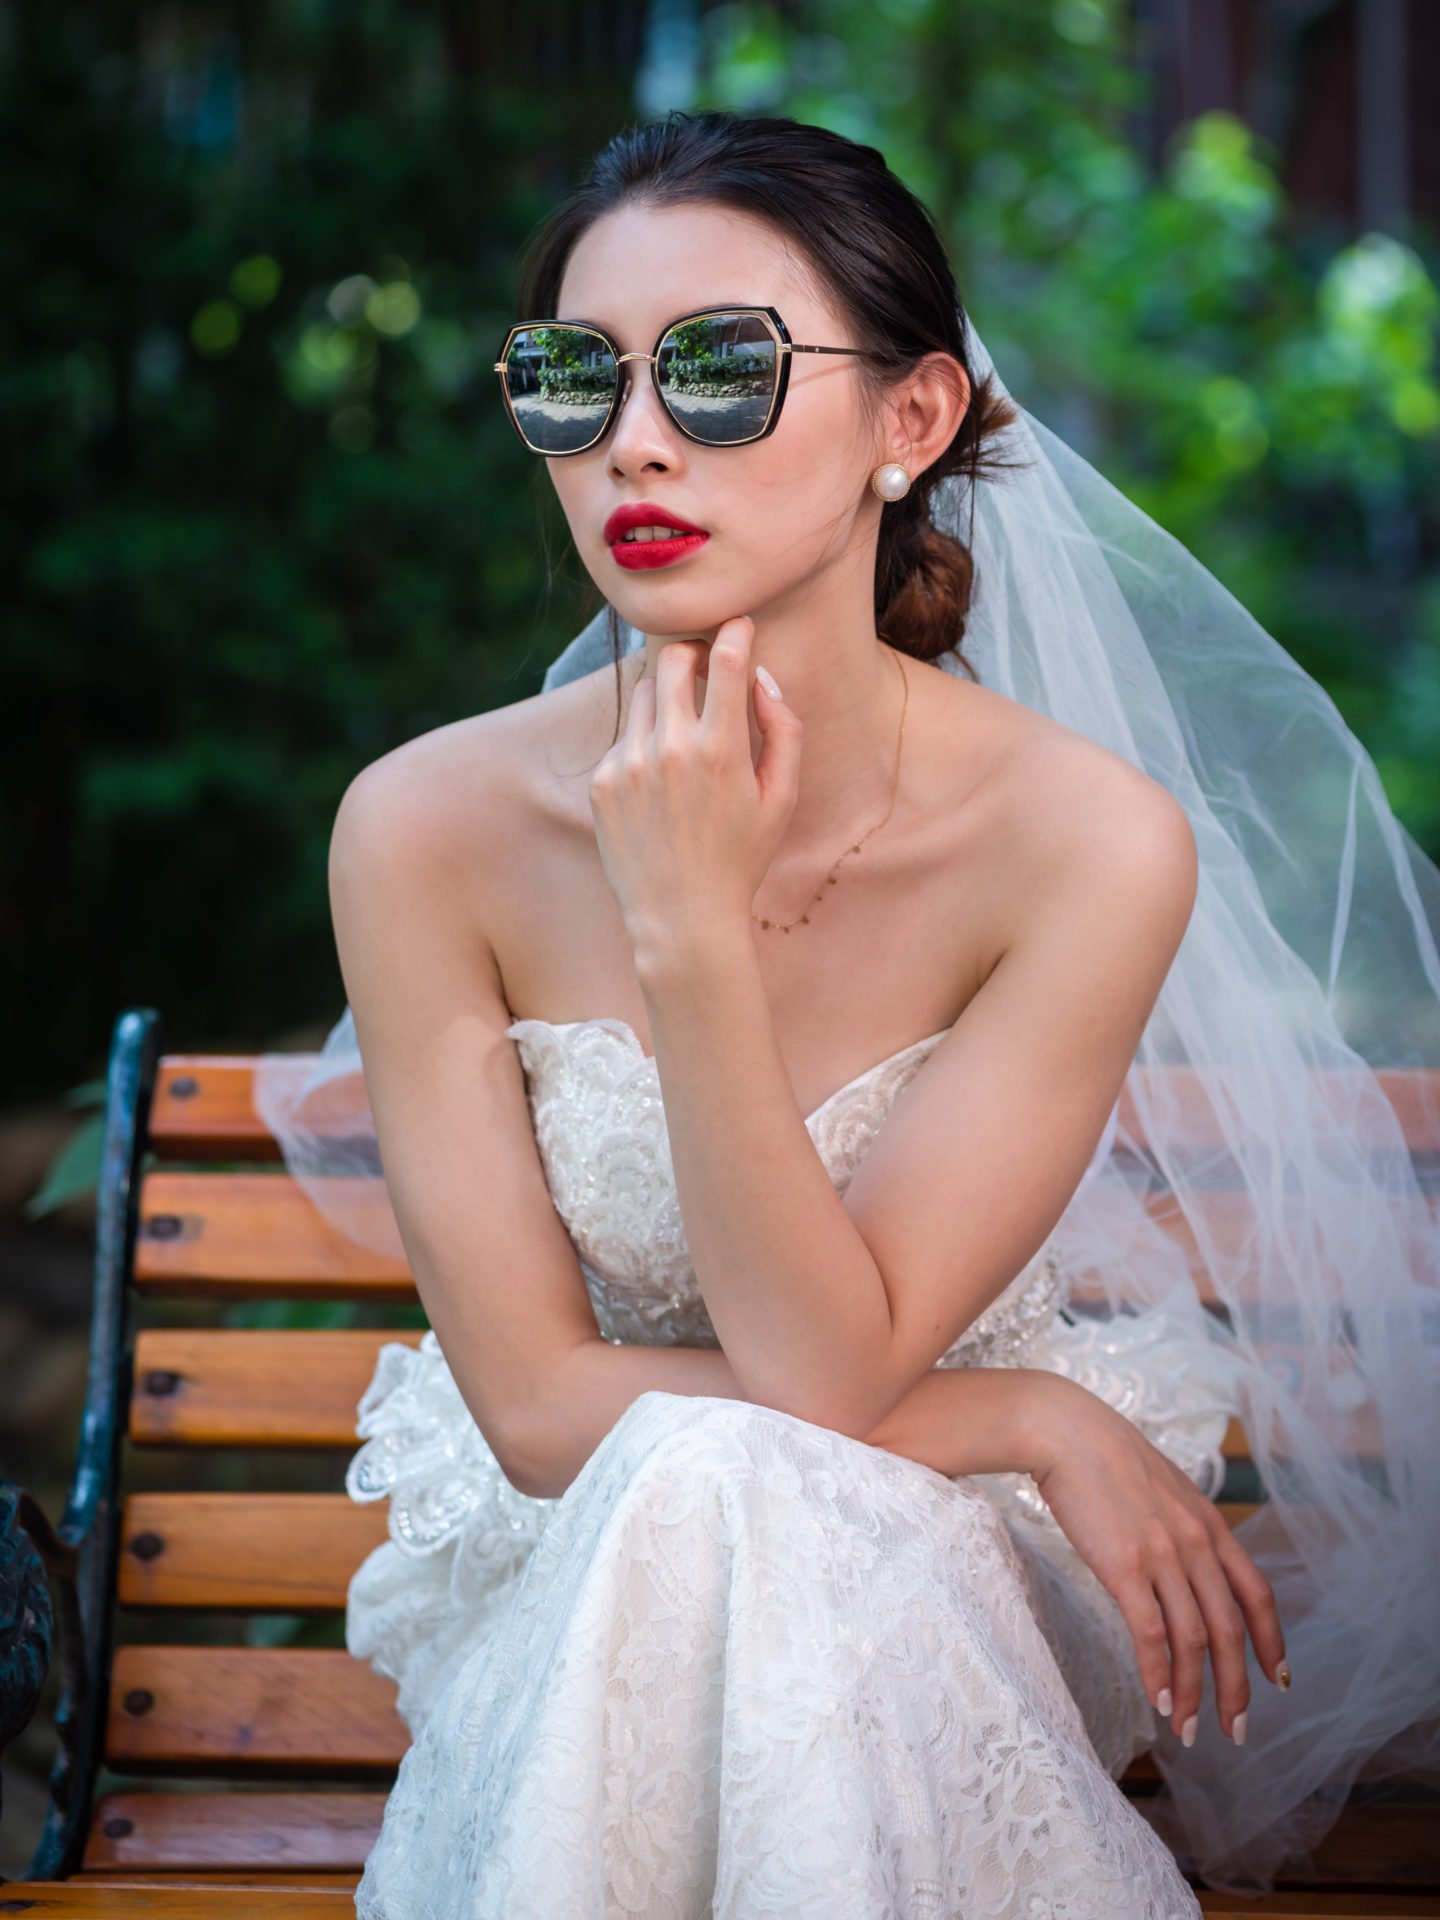 Young chinese bride with sunglasses sitting on a bench in Chengdu, Sichuan province, China